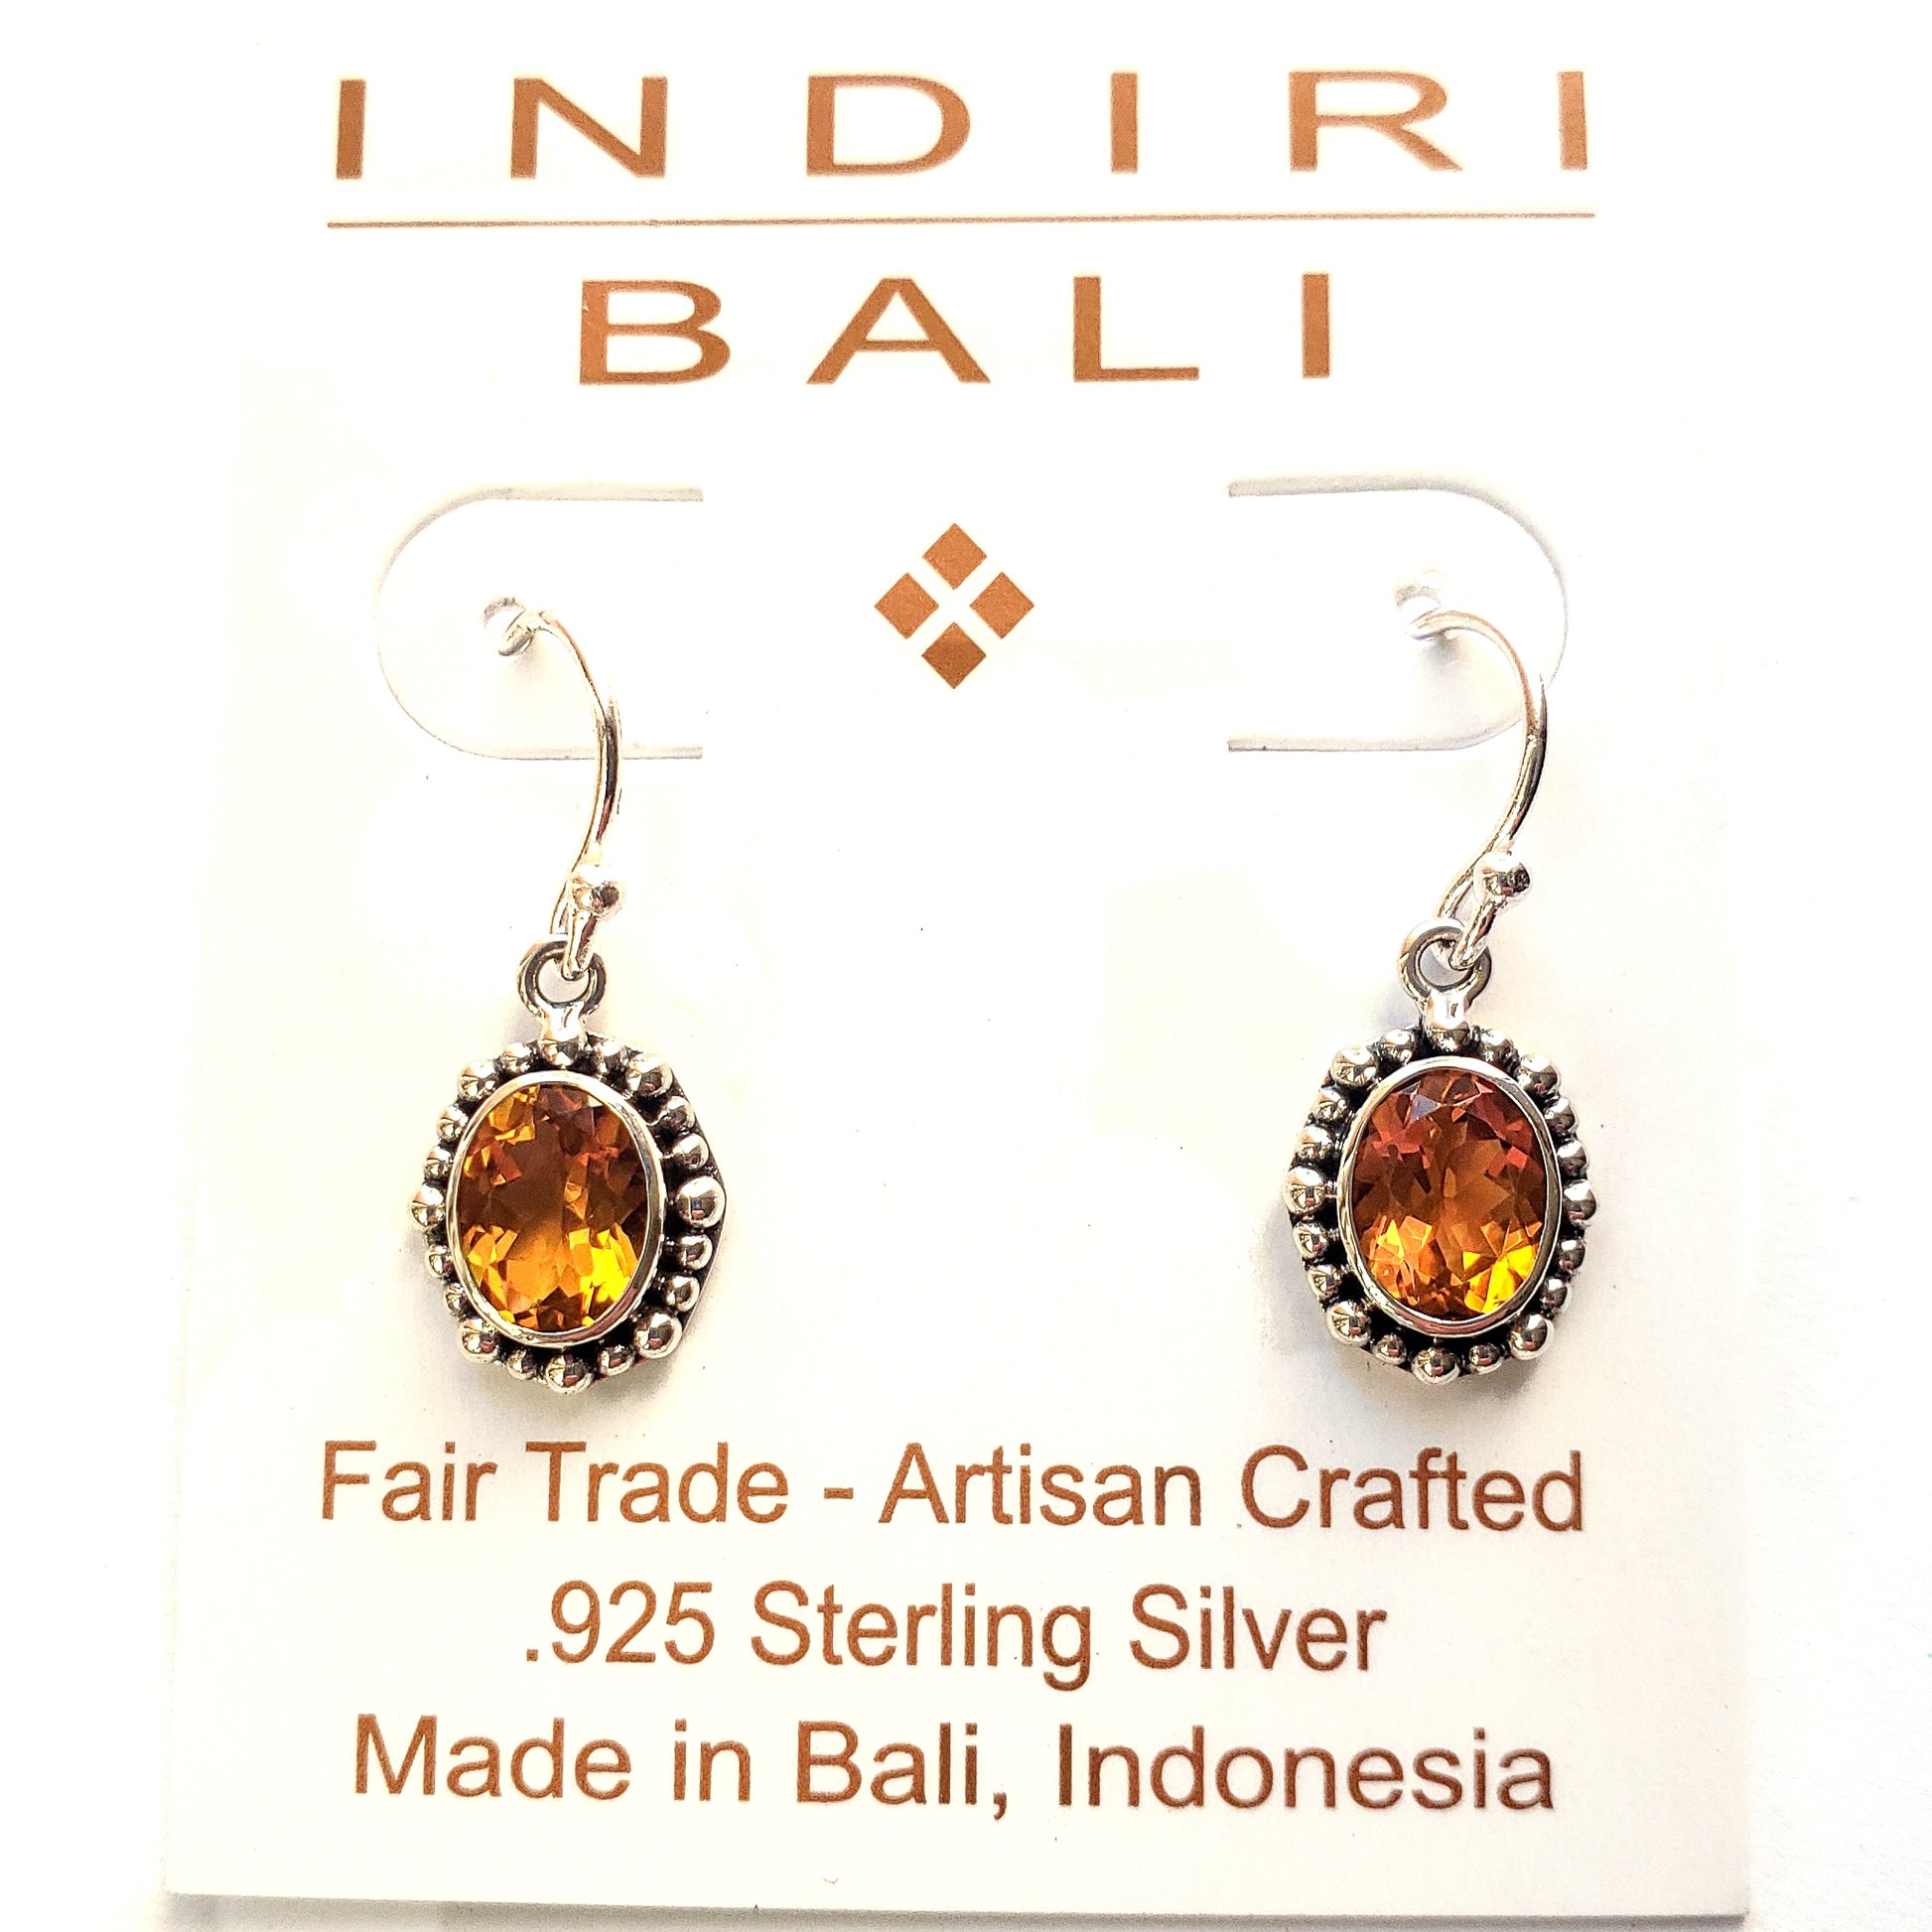 Silver earrings with oval citrine gemstones.